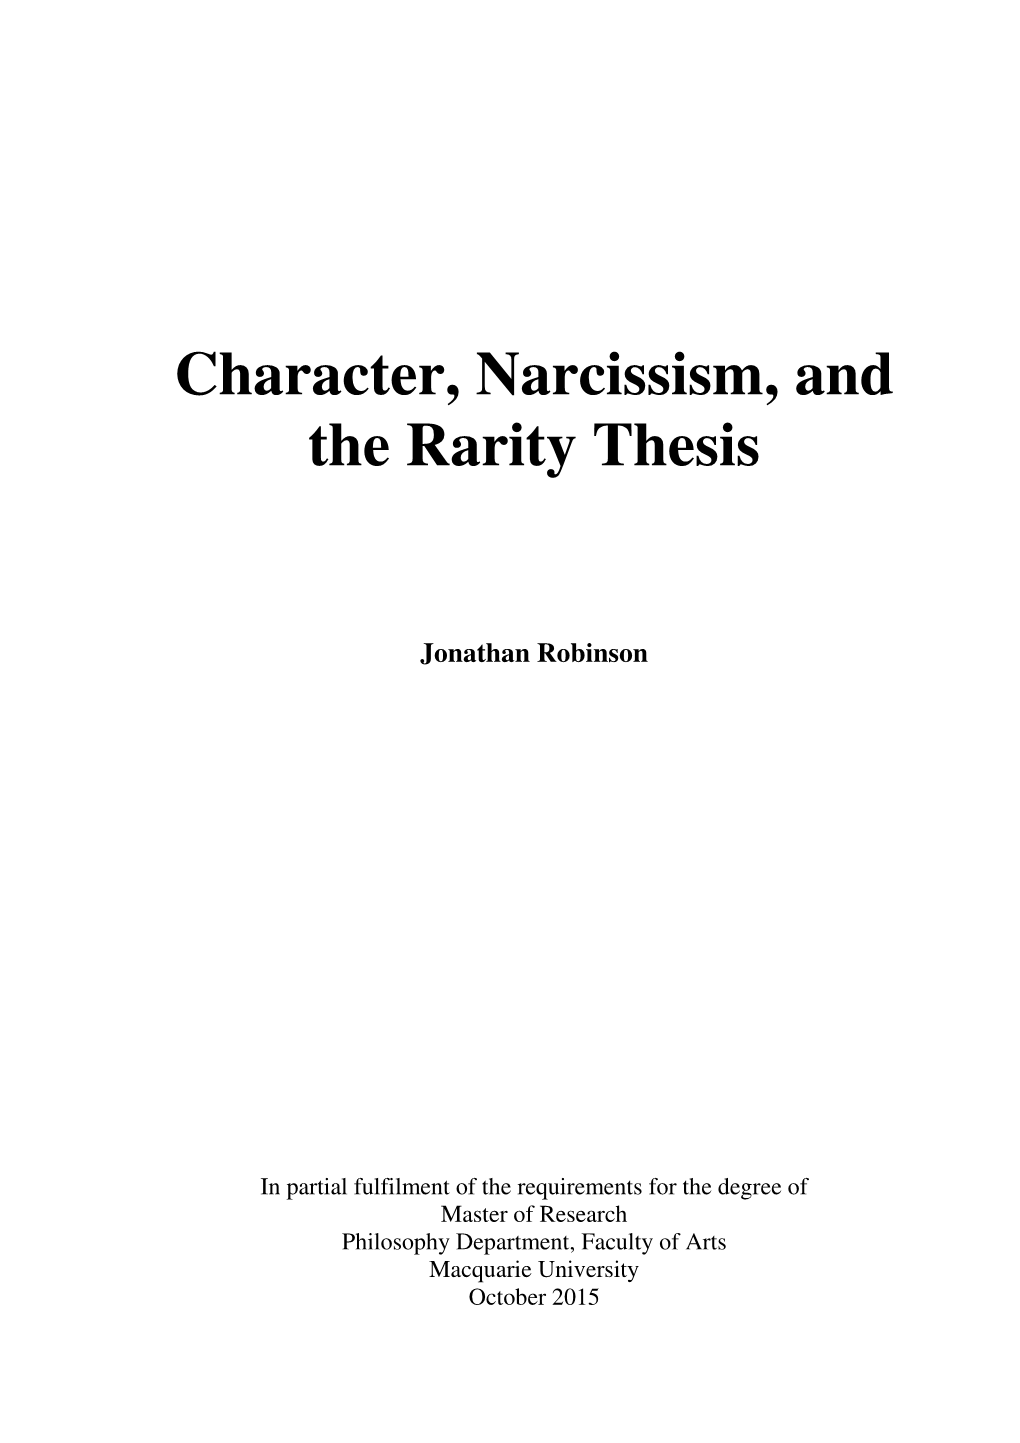 Character, Narcissism, and the Rarity Thesis